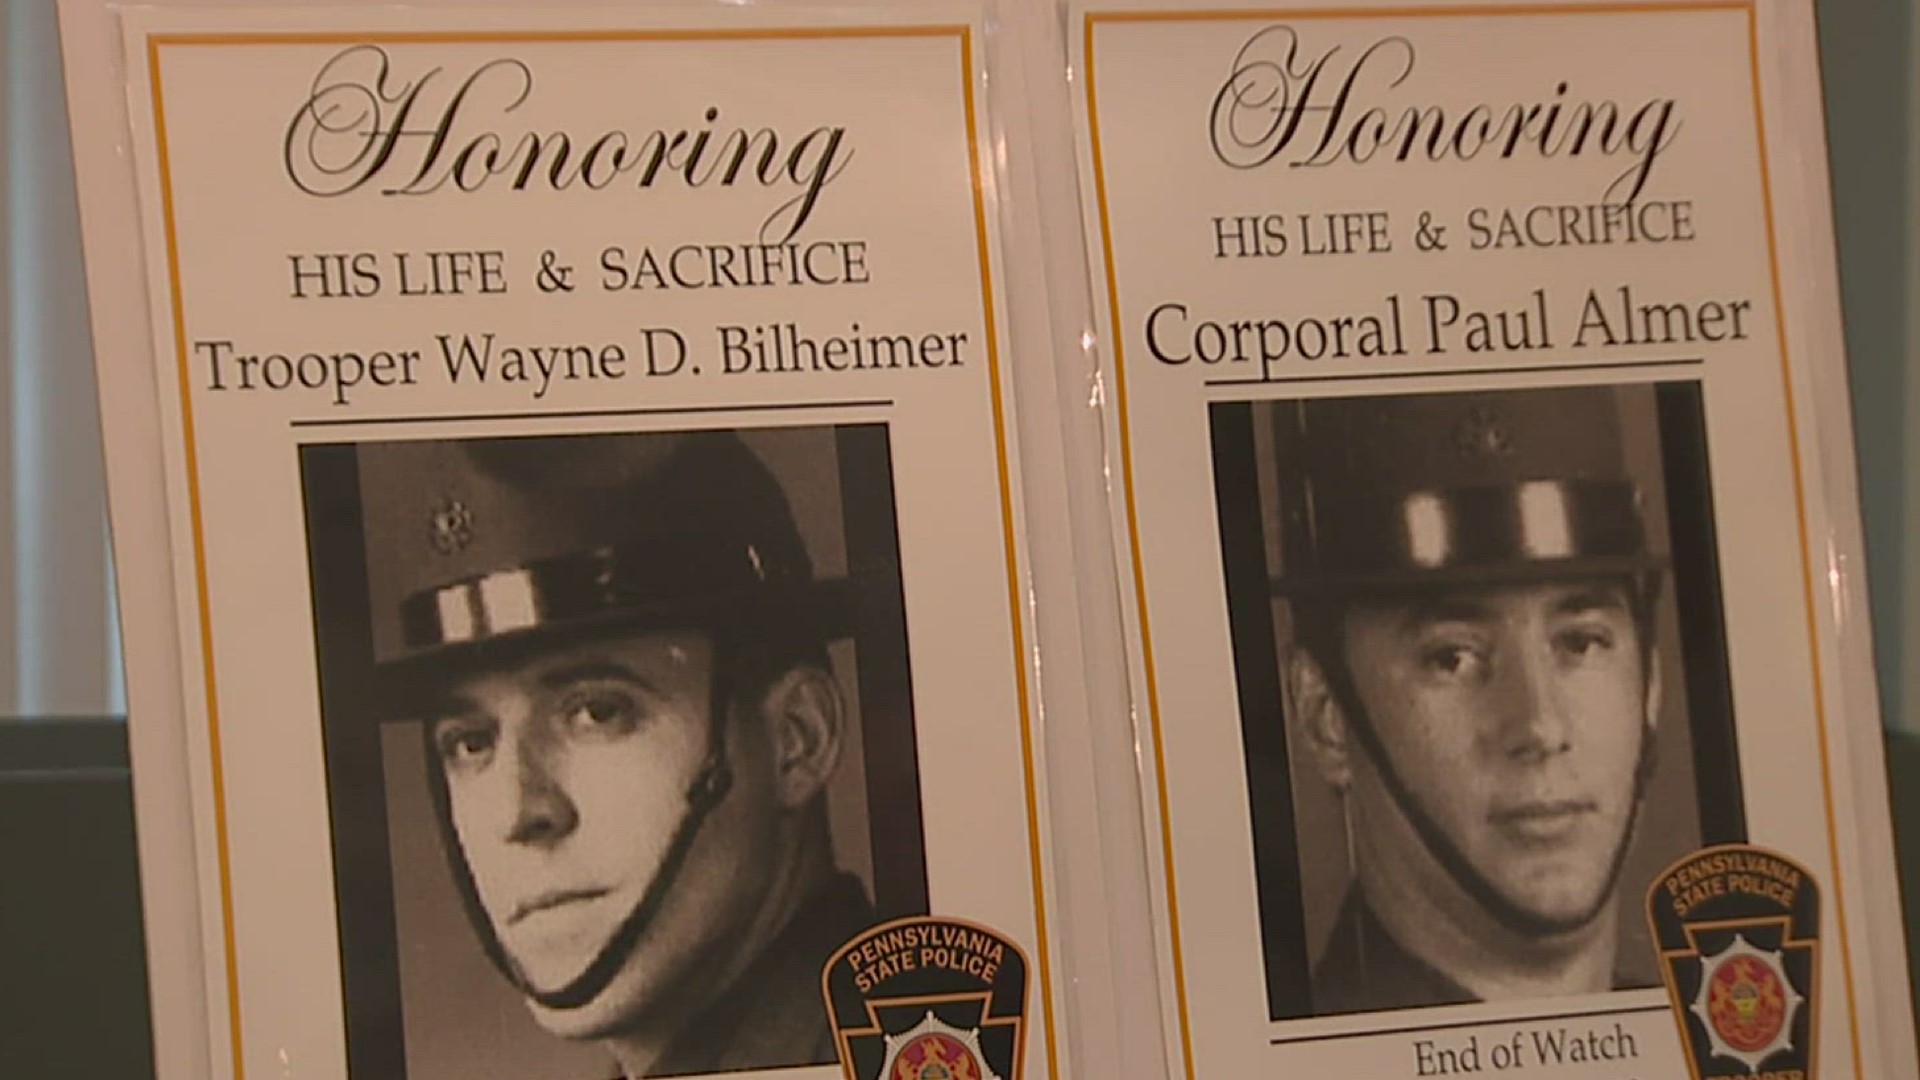 On April 12, 1989, two troopers were killed when a helicopter they were in crashed into the Susquehanna River while searching for a missing person.